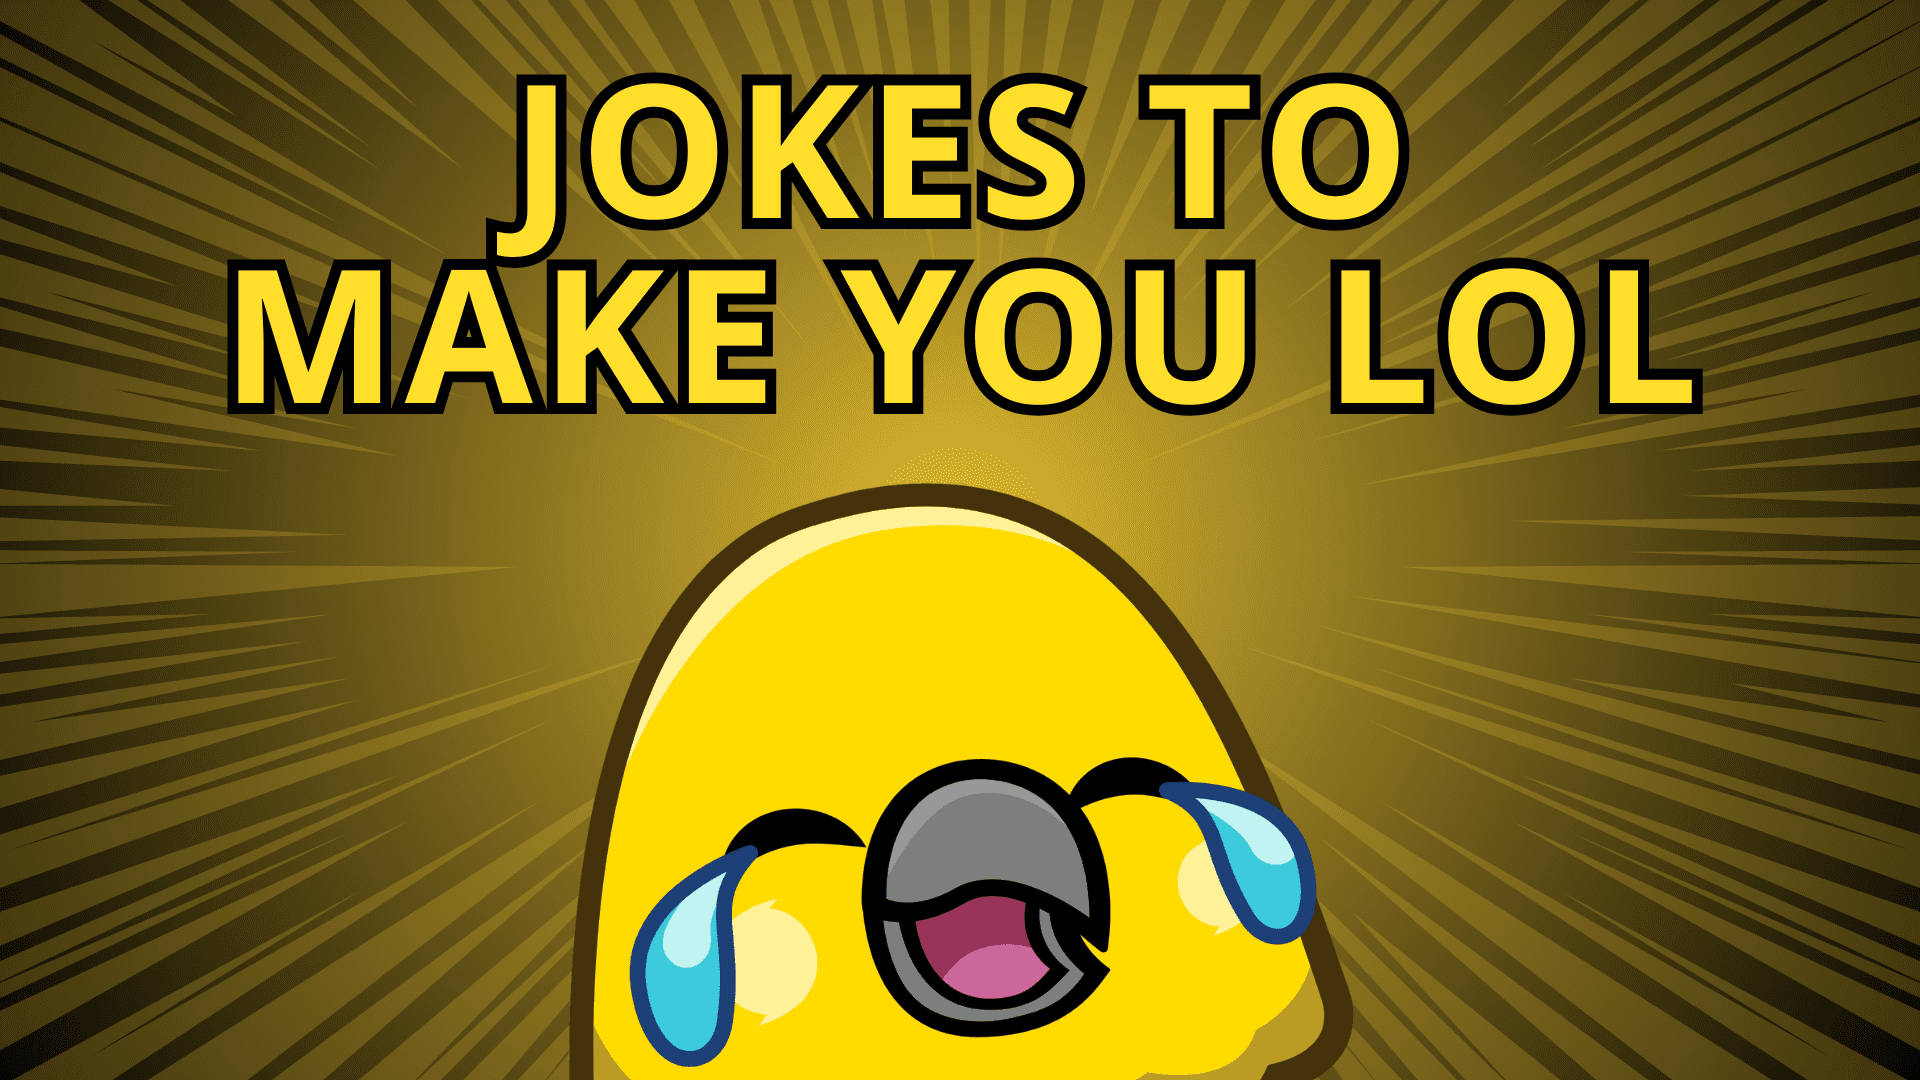 A yellow laughing with tears parrot emote against a comic book lined yellow background. The text says "Jokes to make you LOL". This introduces our jokes for kids that are really funny.